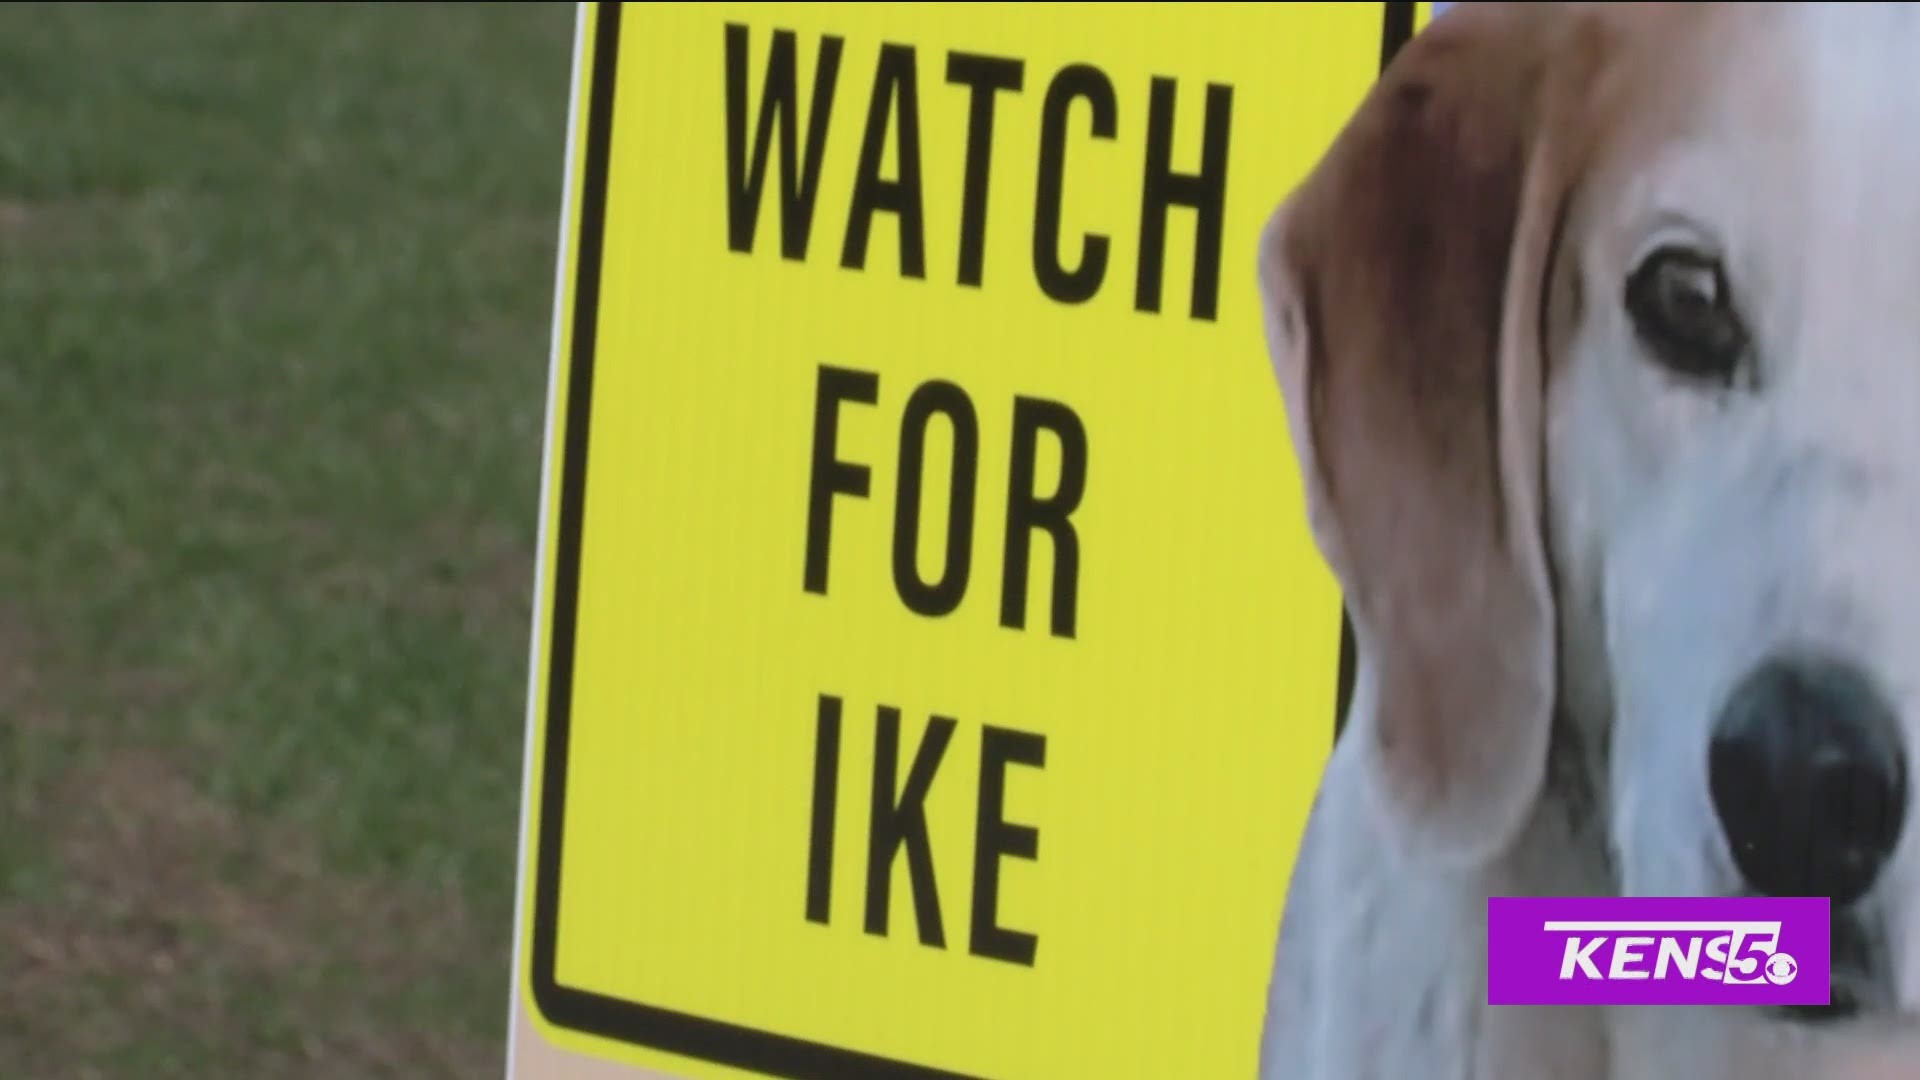 Ike the "3-Way" panhandling dog is gaining popularity all over the US for more than his begging.